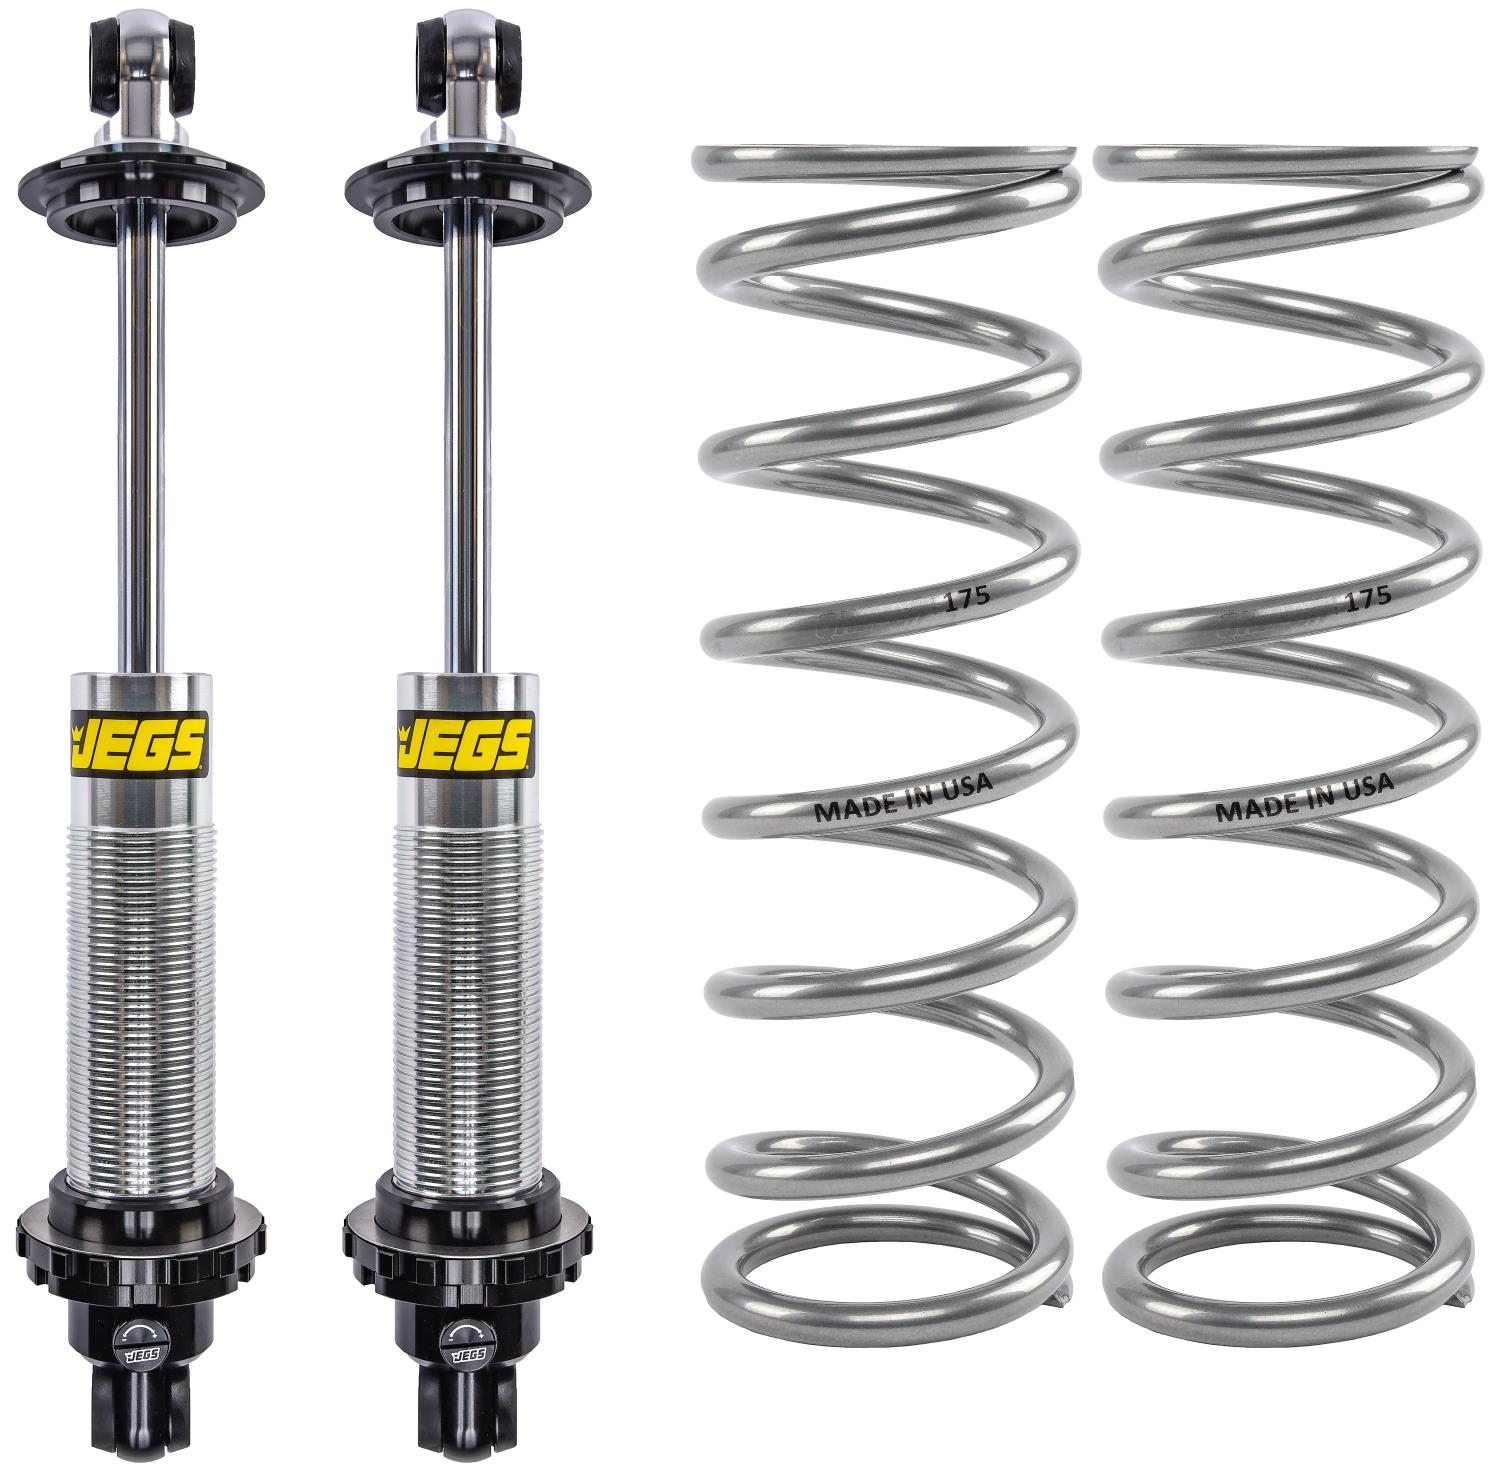 Single-Adjustable Coil-Over Shocks with Coil-Over Springs Kit [10 in. 175 lb./in.]